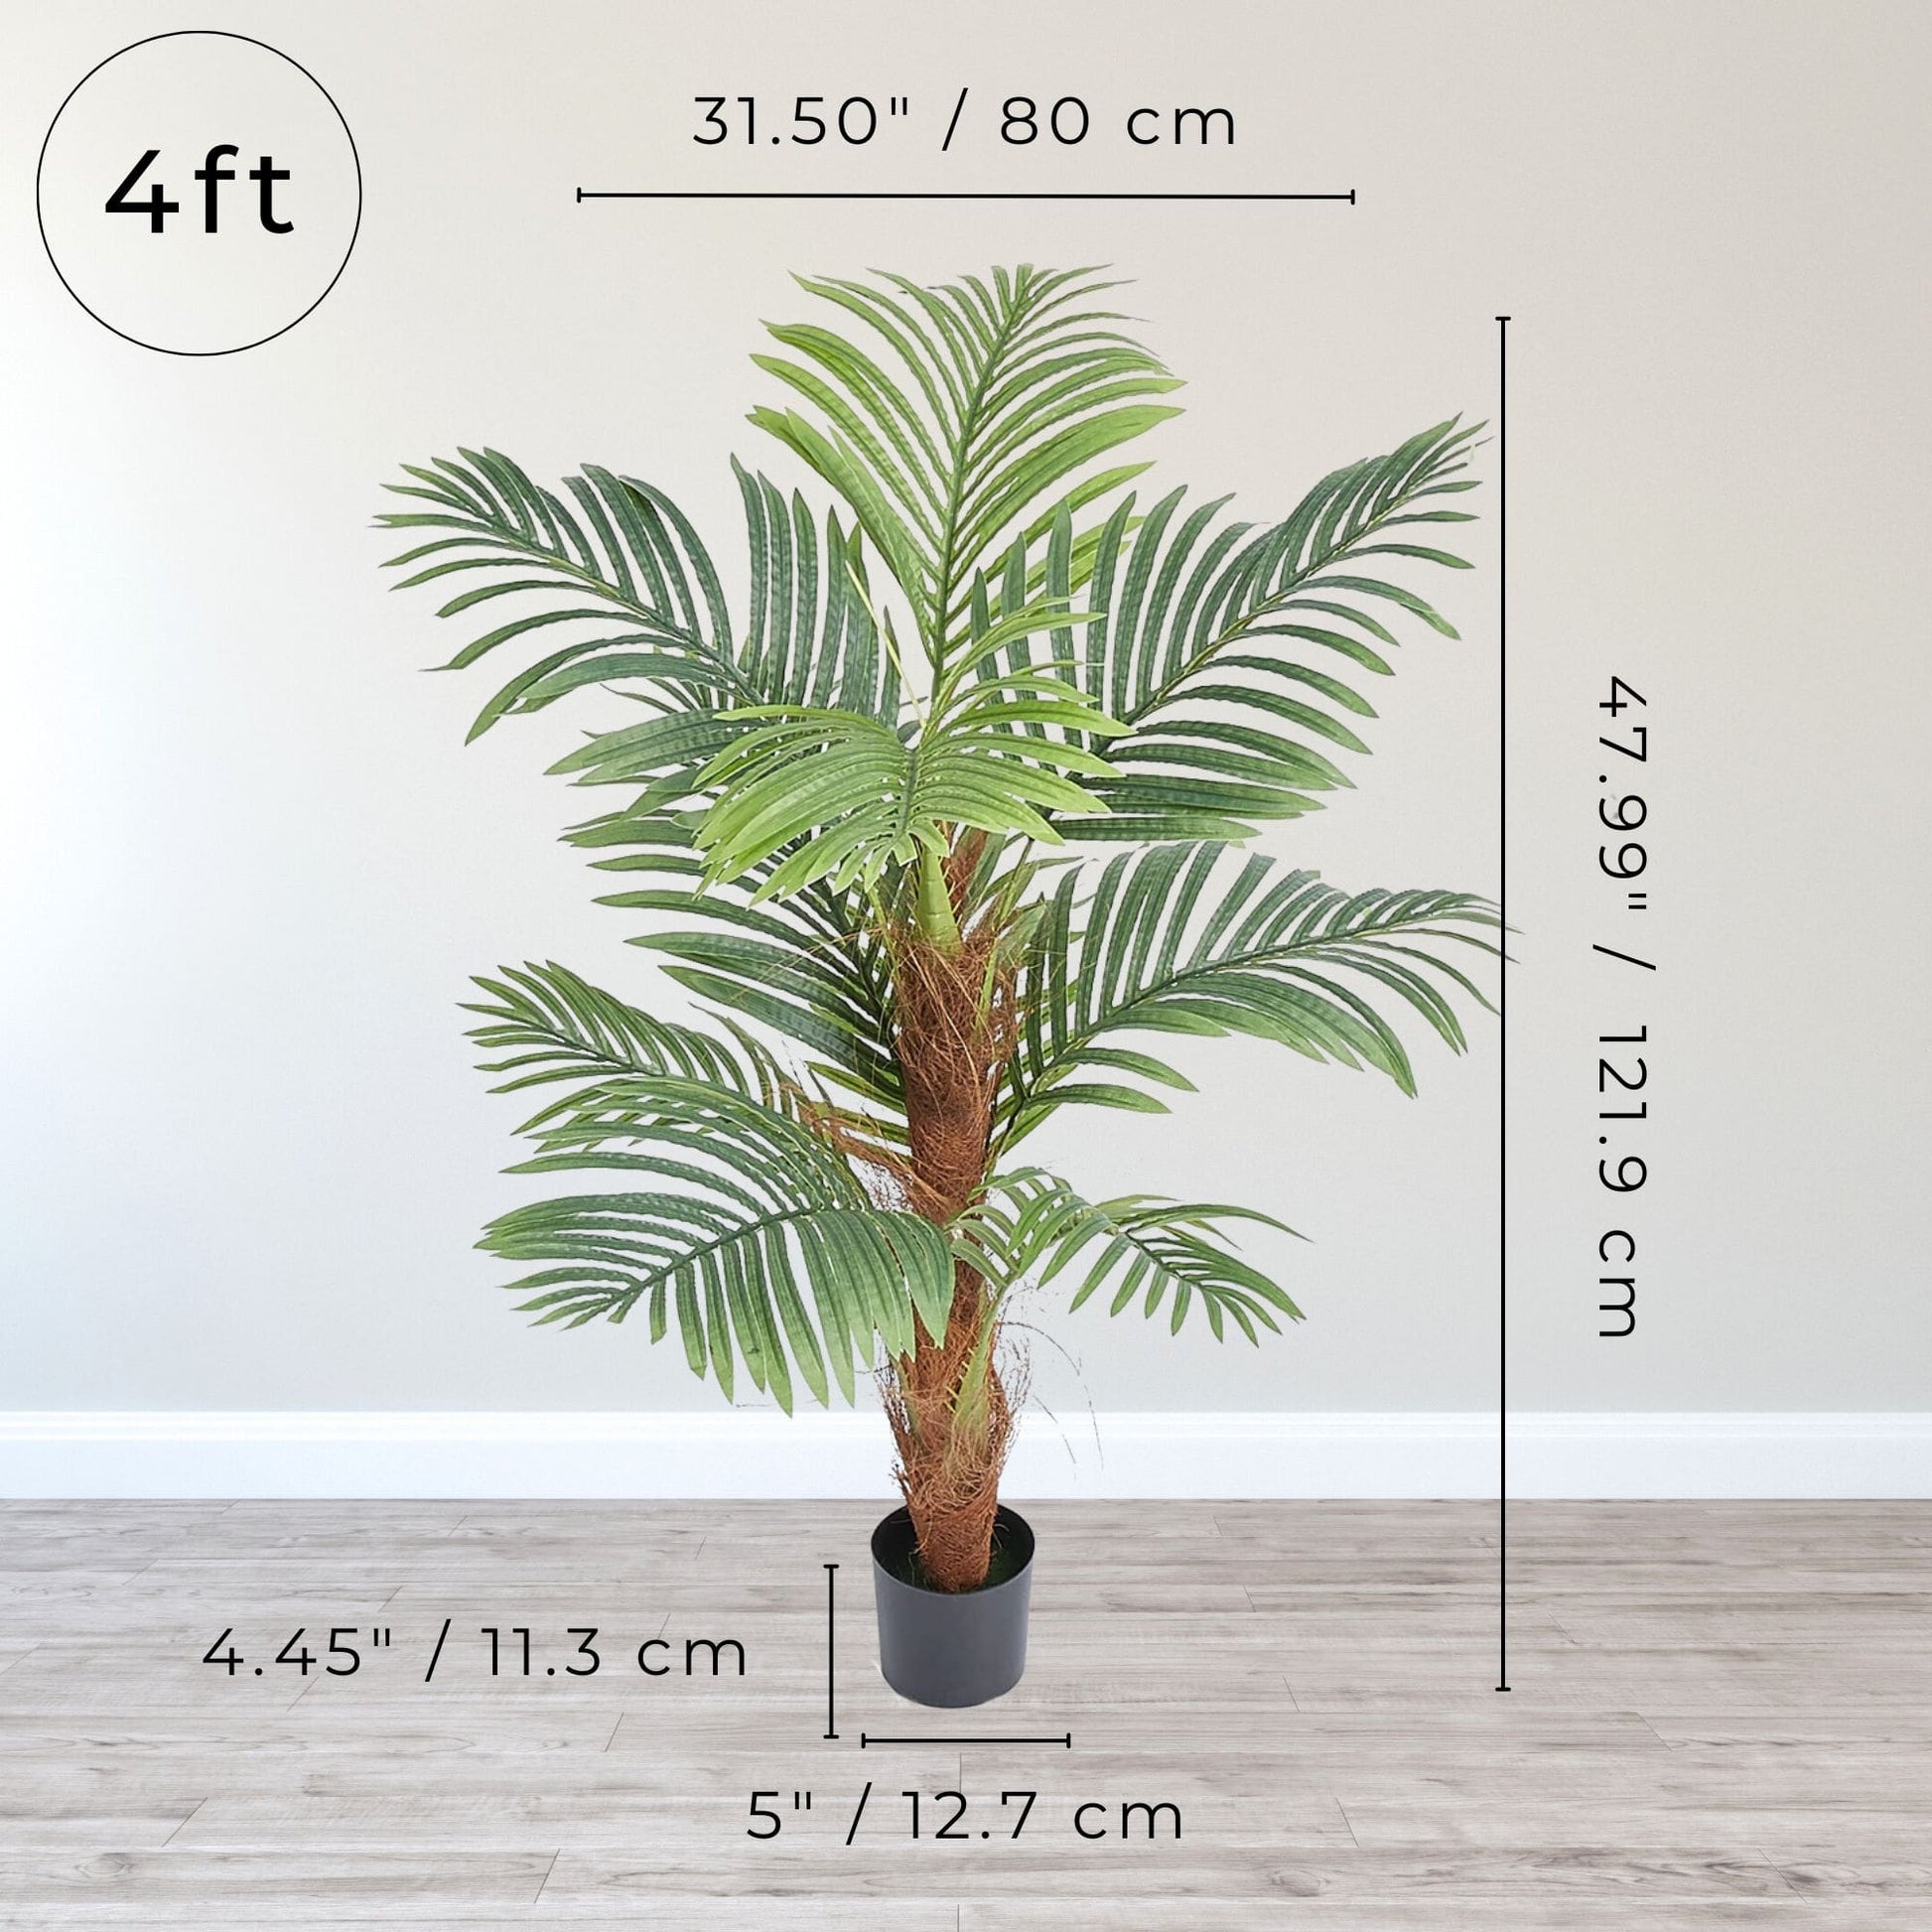 A 4-foot artificial palm tree that brings a tropical essence to indoor spaces